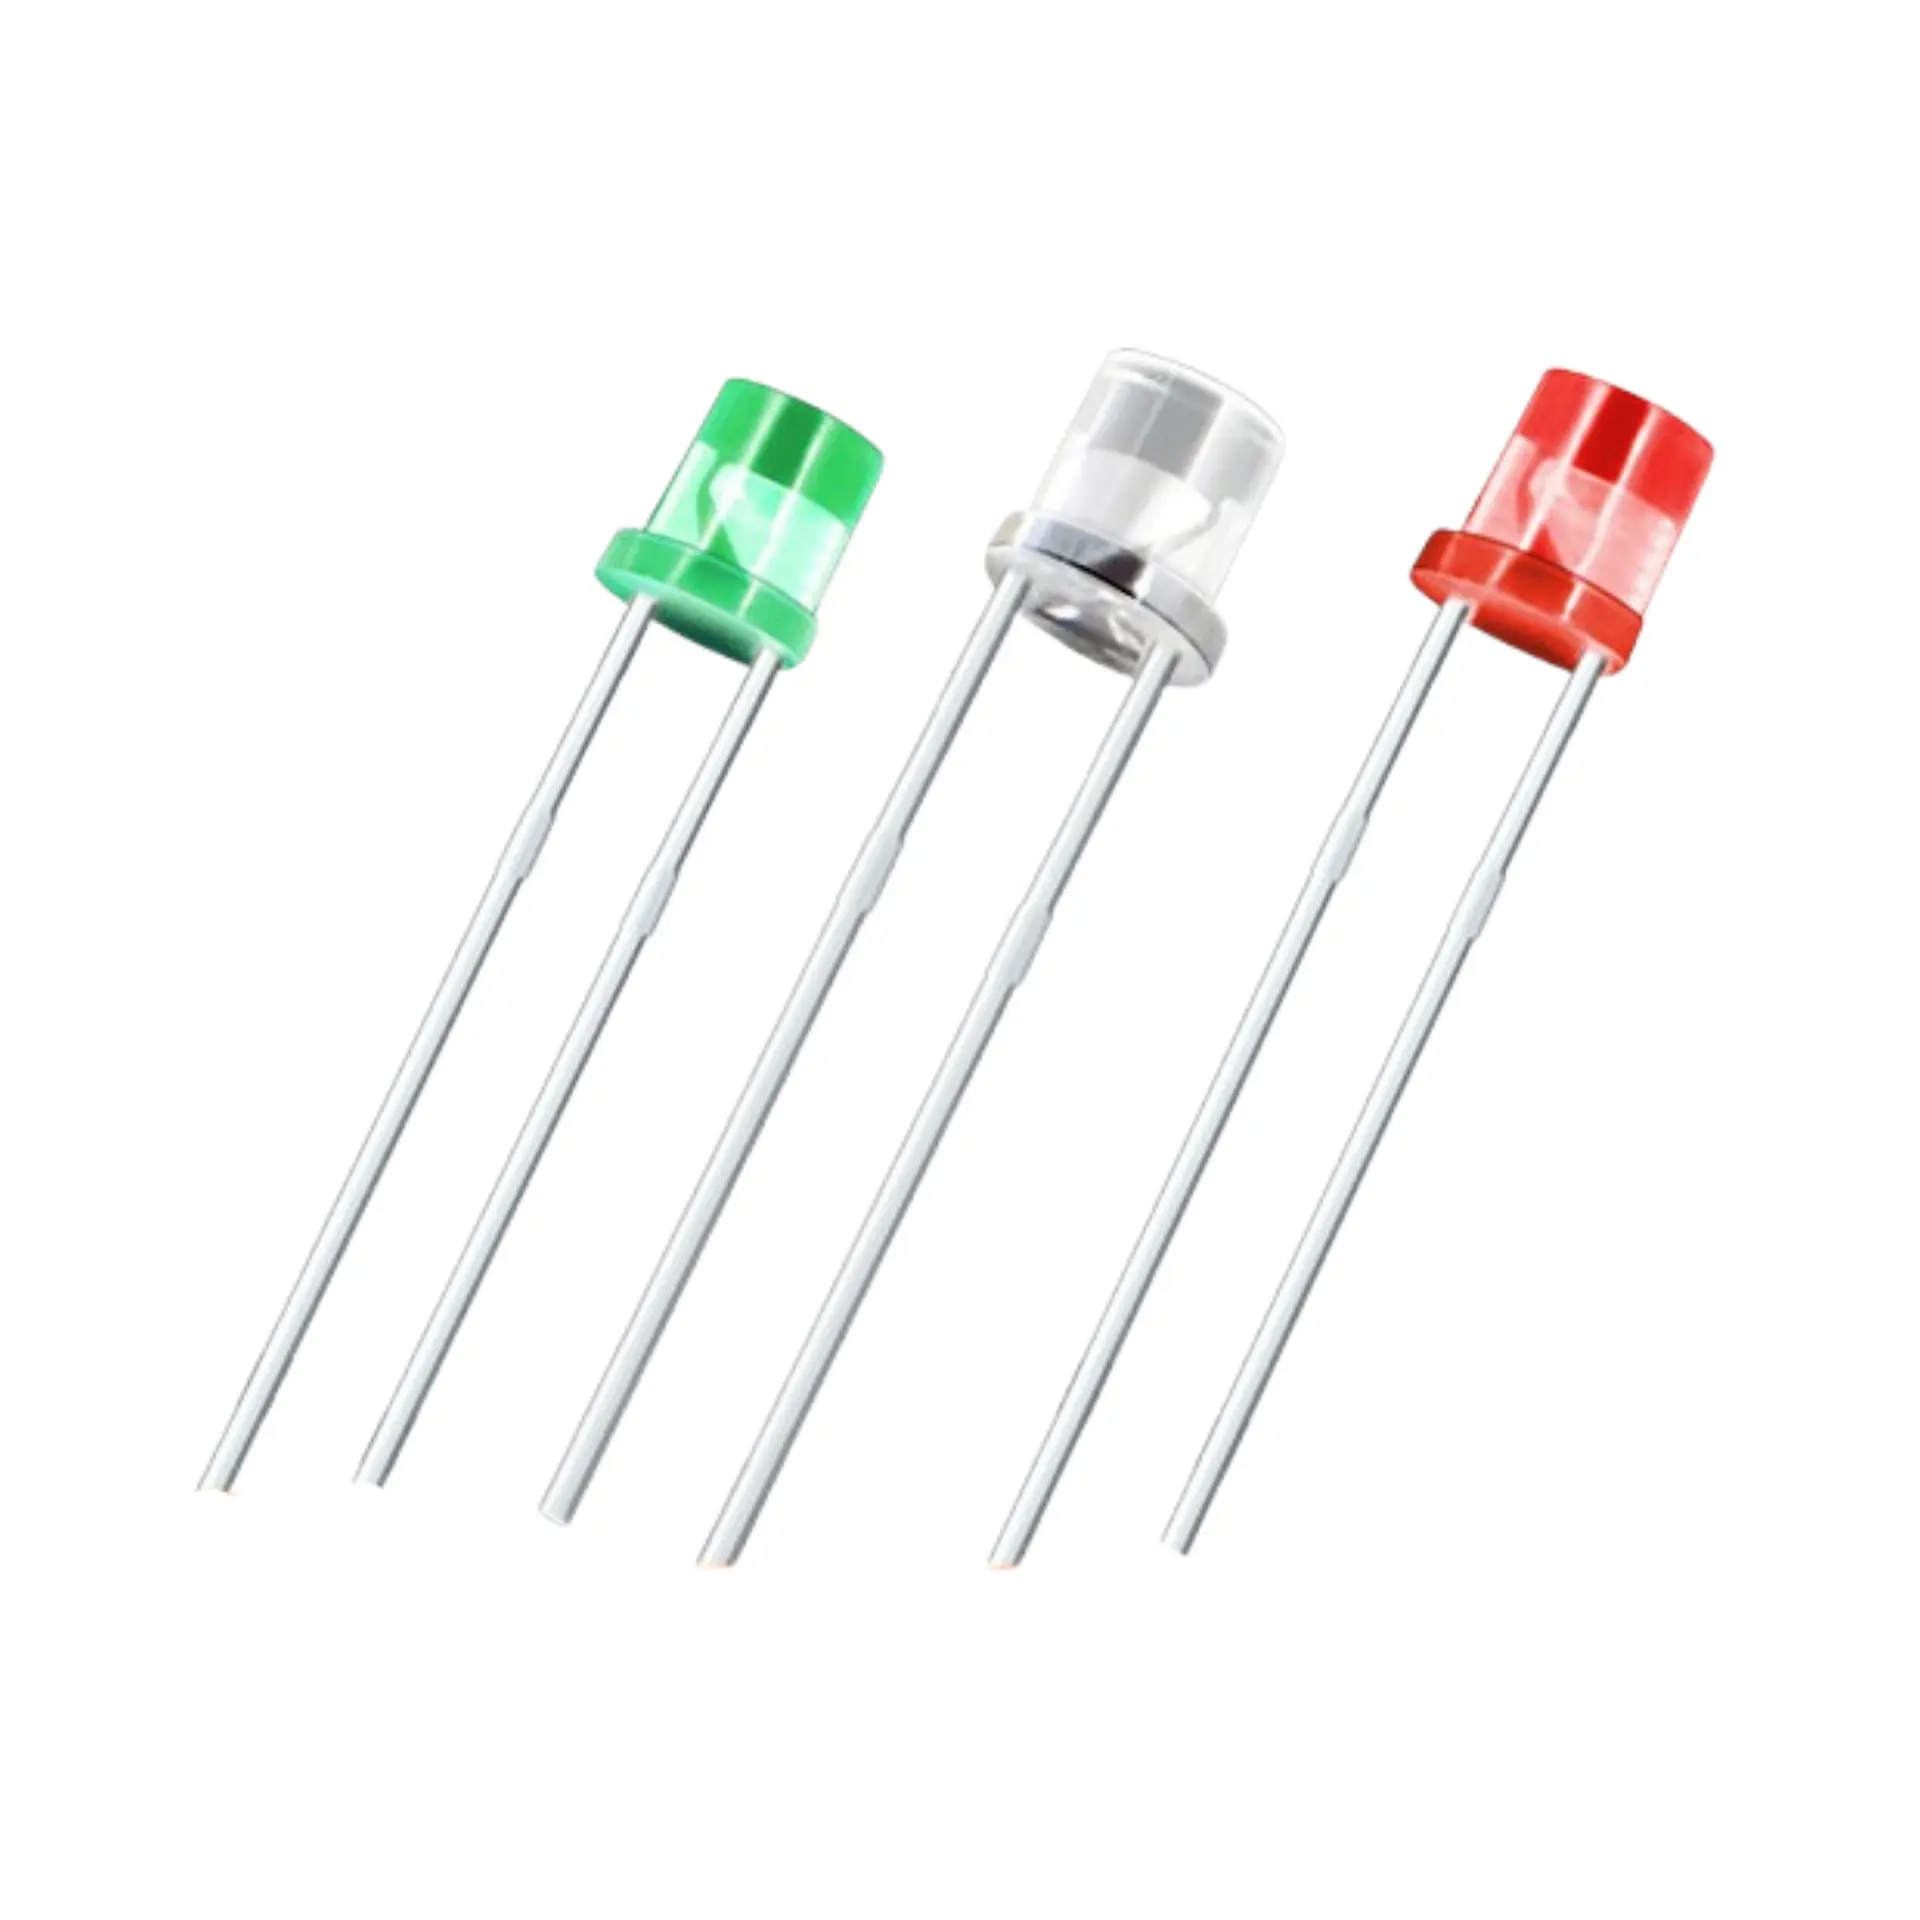 JOMHYM Original Transparent Diffused Red Green Blue Yellow White 3mm 5mm Flat Top Flat DIP LED Diode